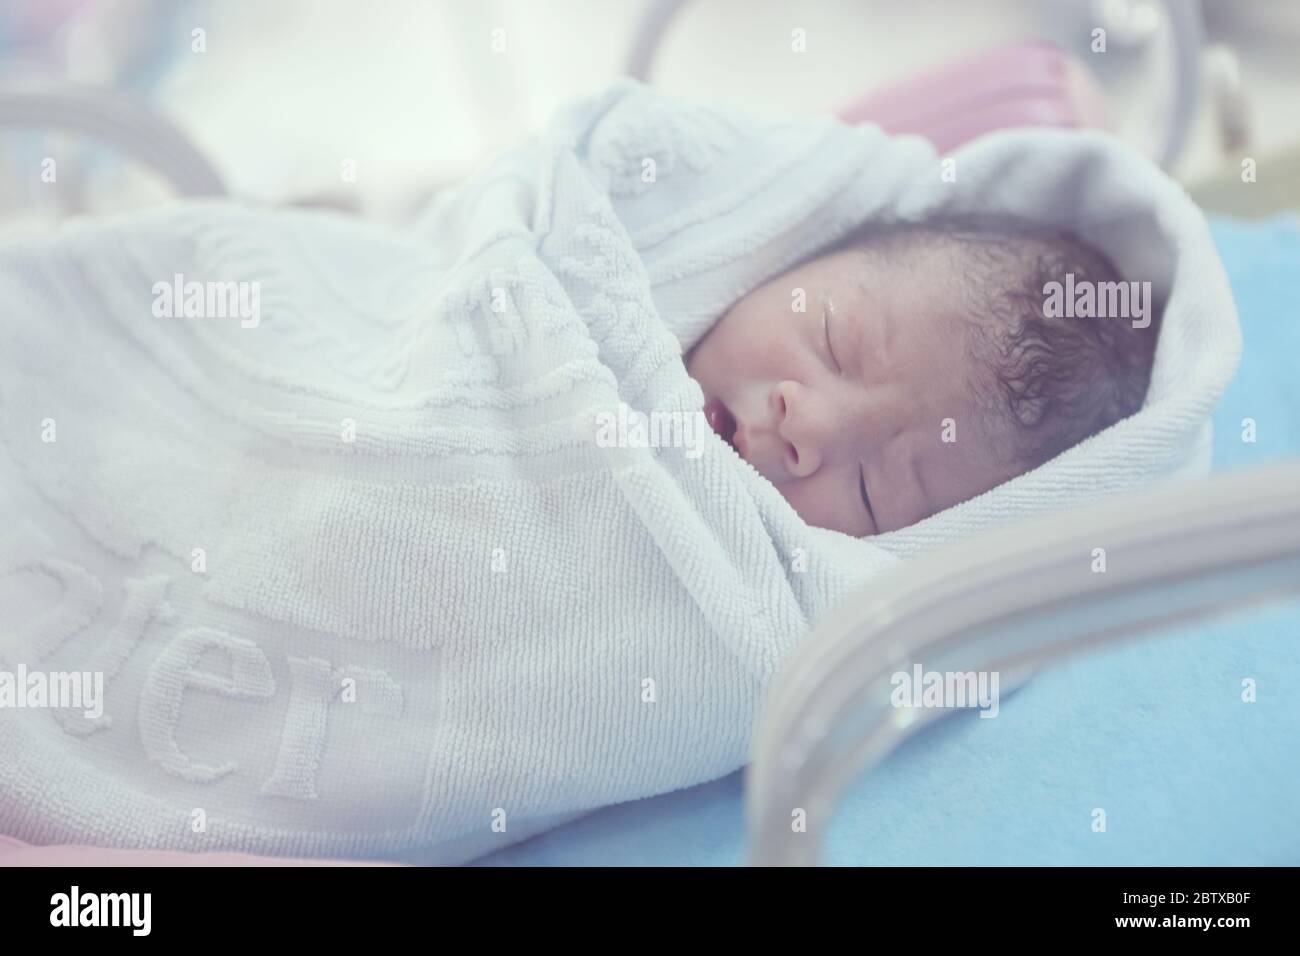 Baby at the hospital, Soft focus and blurry, vintage style color effect Stock Photo